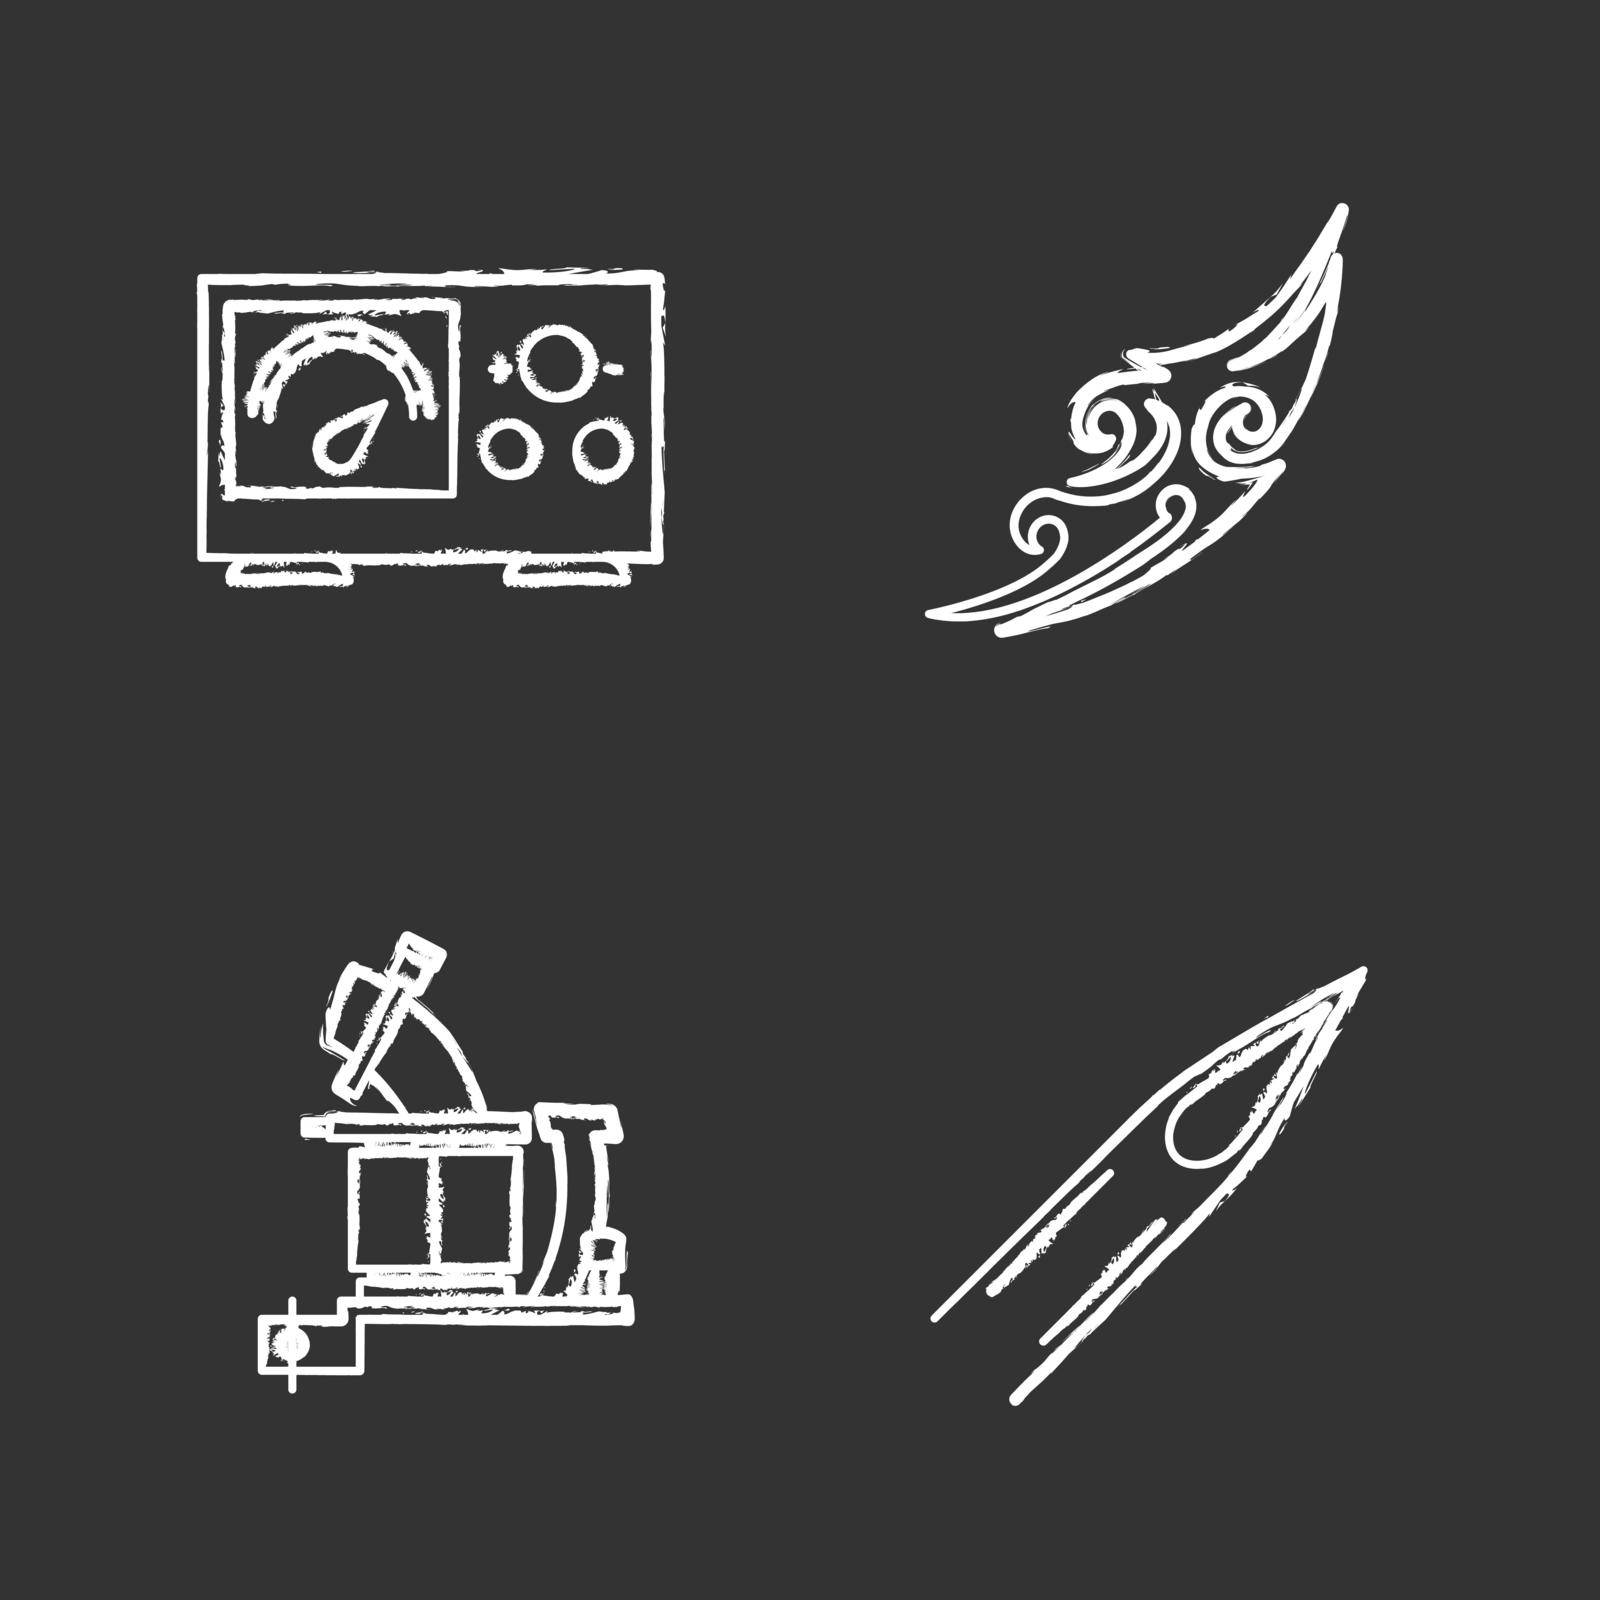 Tattoo studio chalk icons set. Piercing service. Power supply, tattoo machine, sketch, ink needle tip. Isolated vector chalkboard illustrations